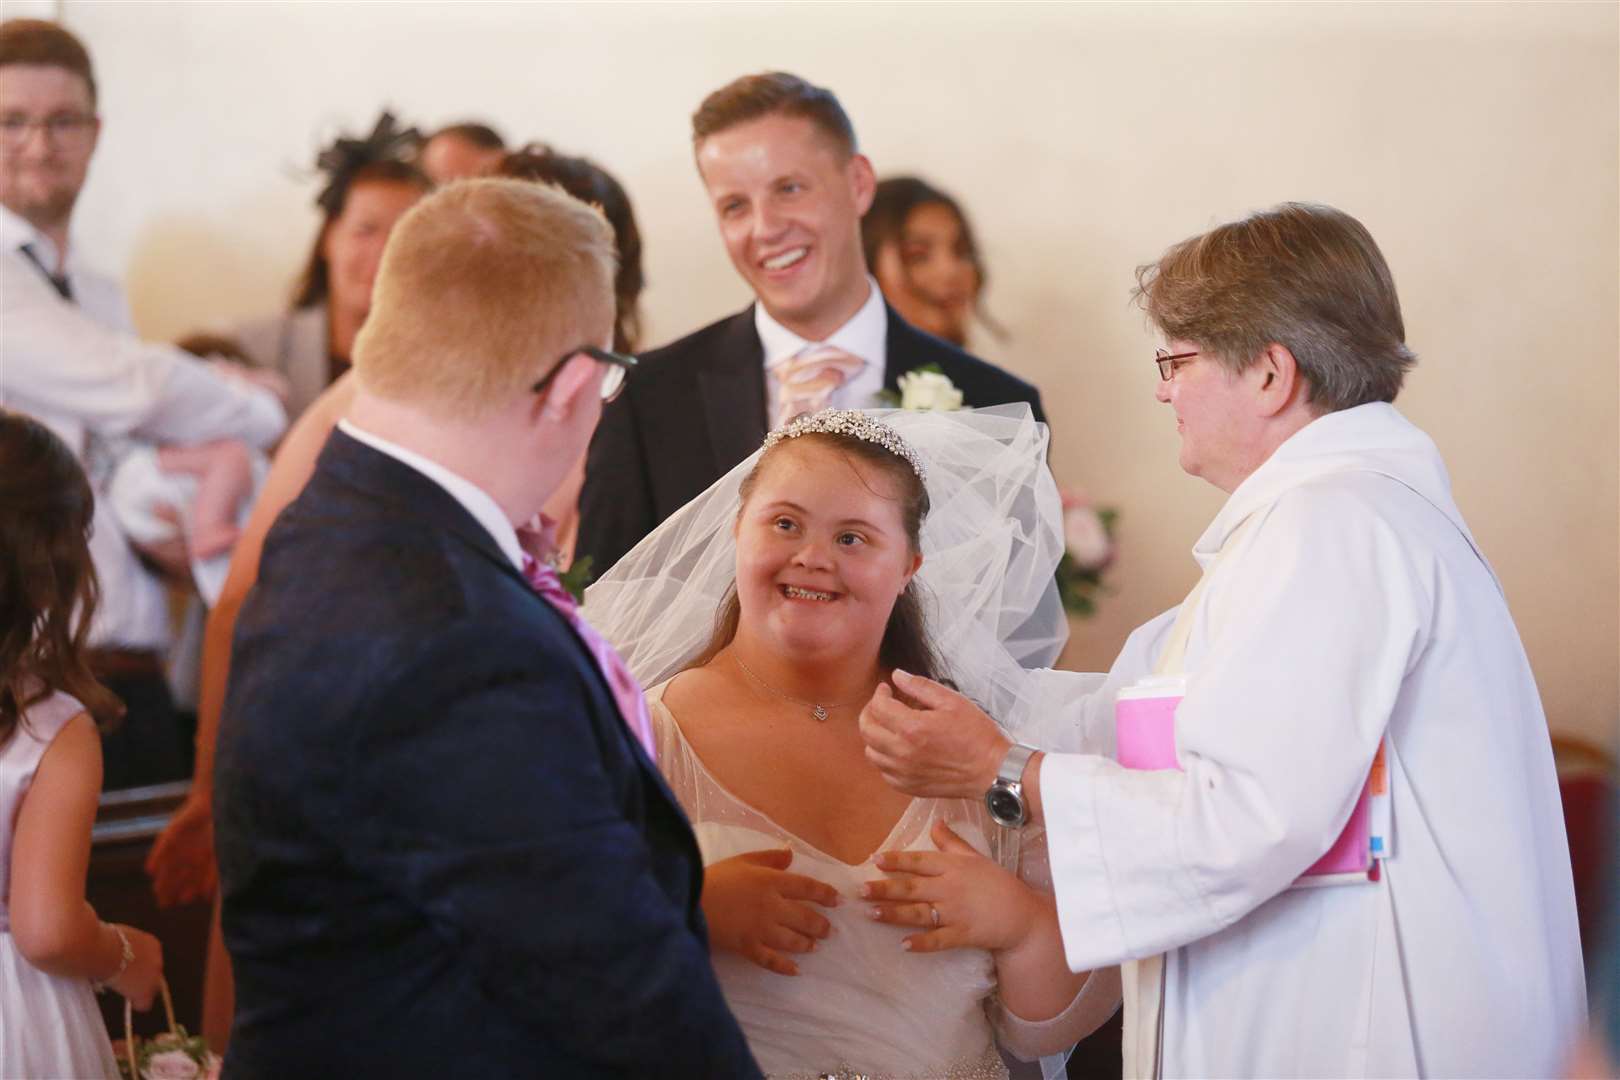 Kieran Duffy sees his bride to be, Emma Houckham, for the first time at All Saints Church, Staplehurst. Picture: John Westhrop.. (15674245)